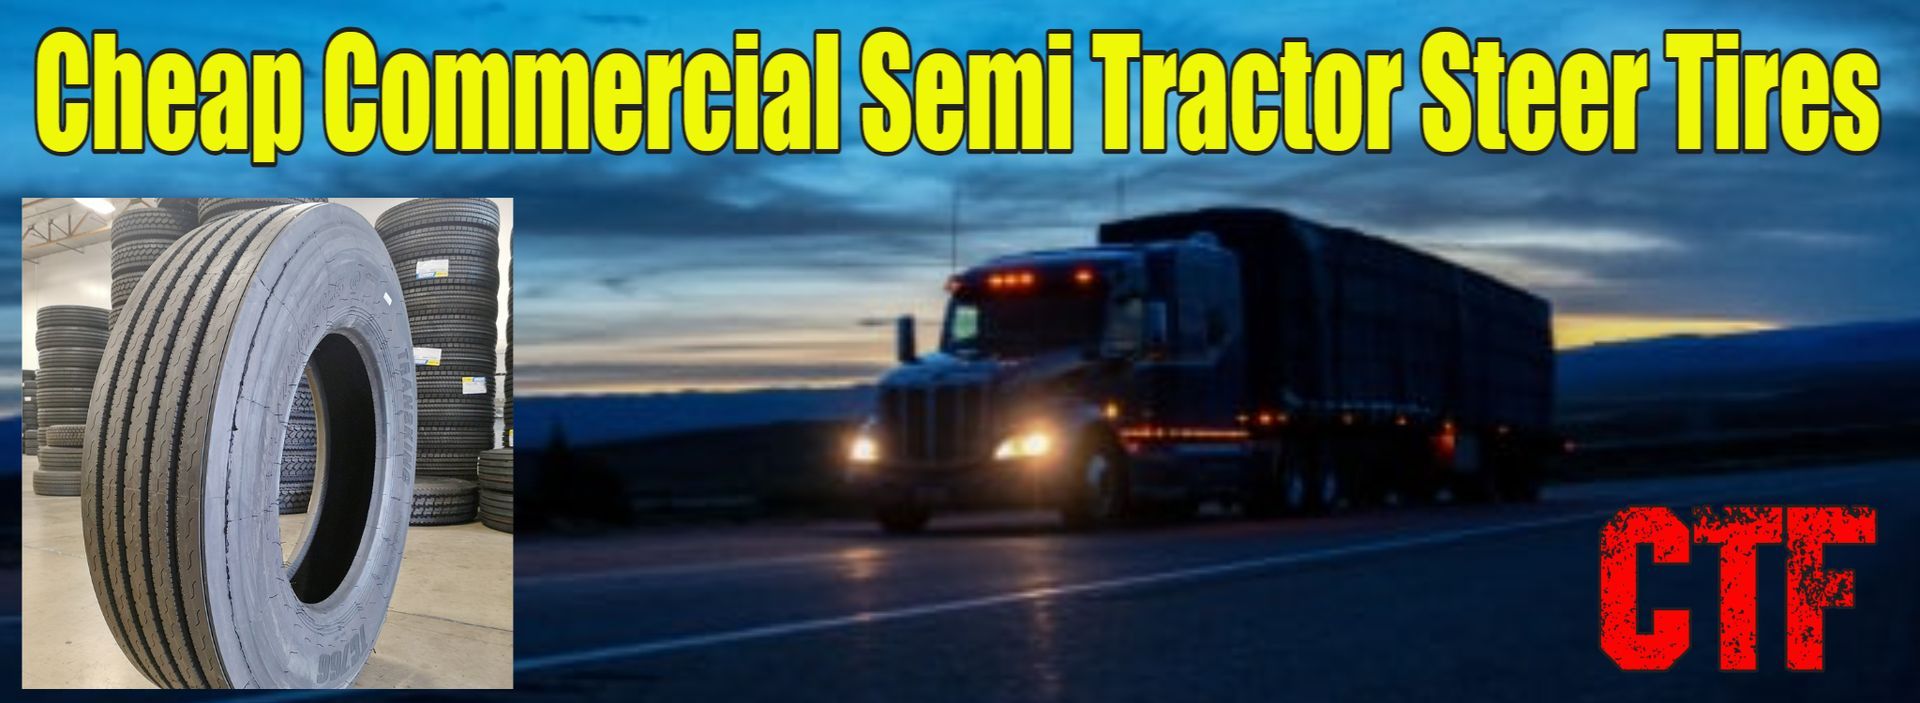 an ad for cheap commercial semi tractor steer tires